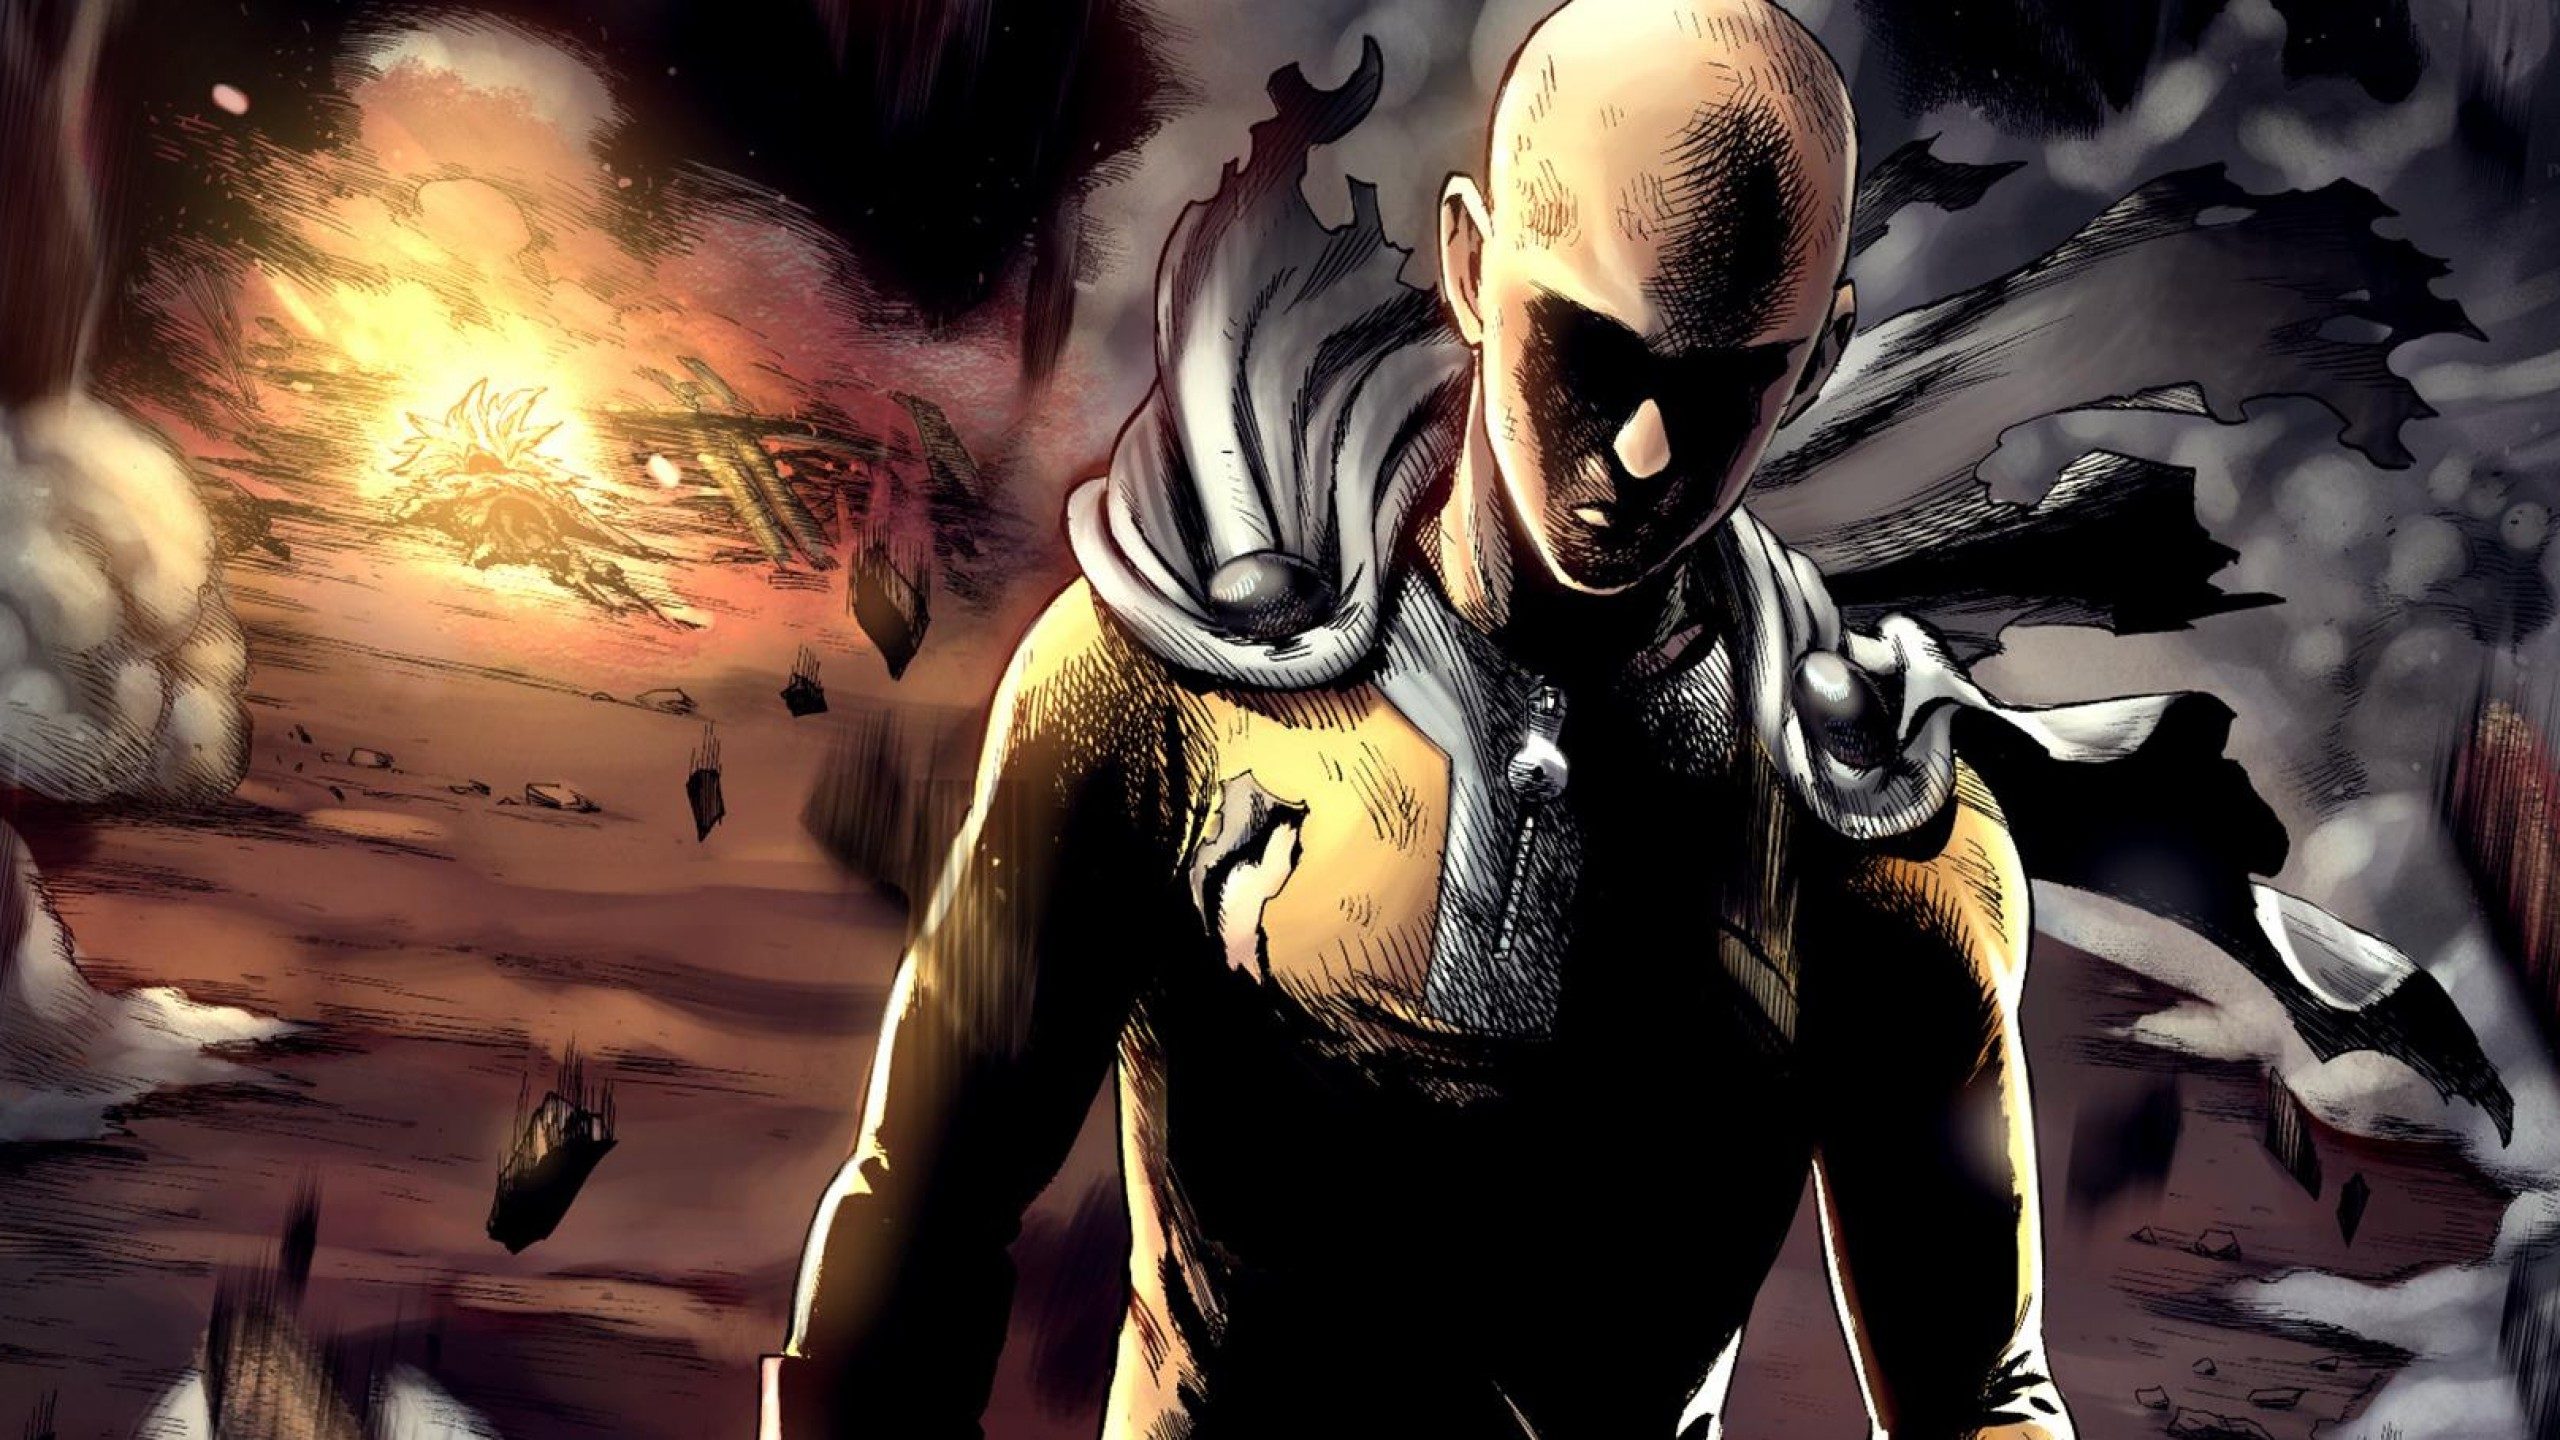 One Punch Man season 2 episode 11 release date and watch online legally